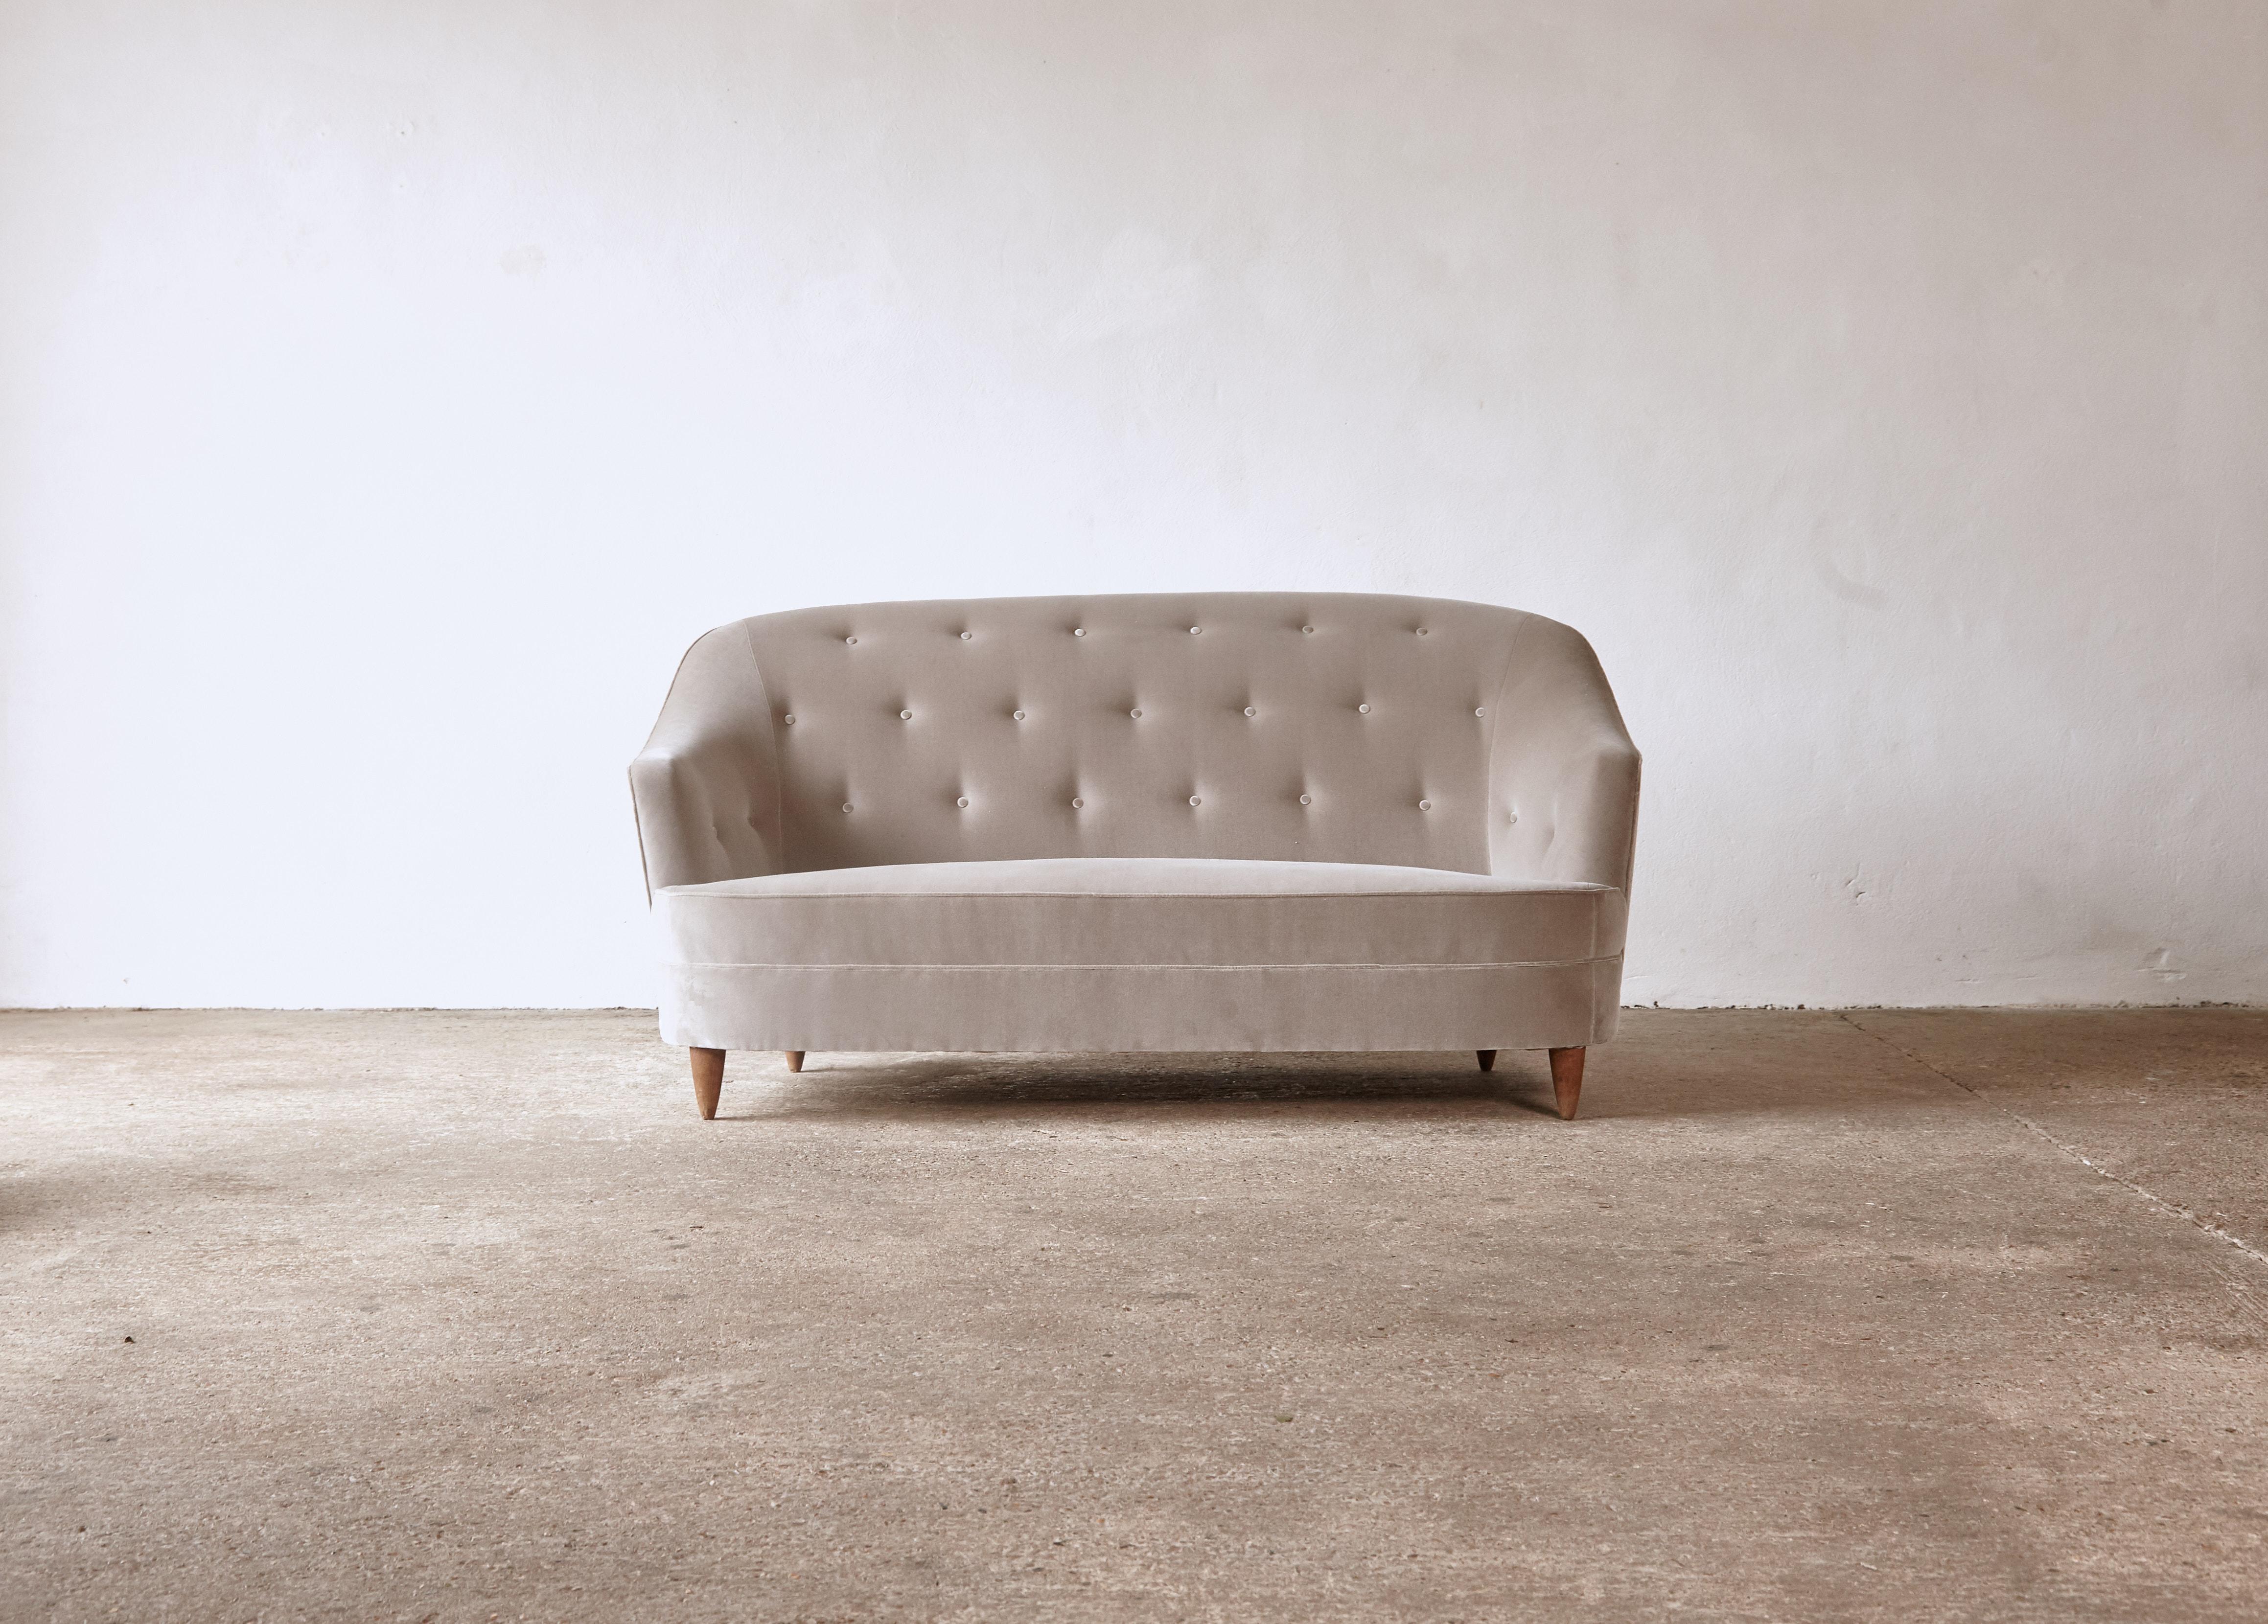 Gio Ponti Sofa, produced by Casa e Giardino Milan, Italy, 1950s.  Newly reupholstered with traditional sprung base and new light grey / silver velvet fabric.

